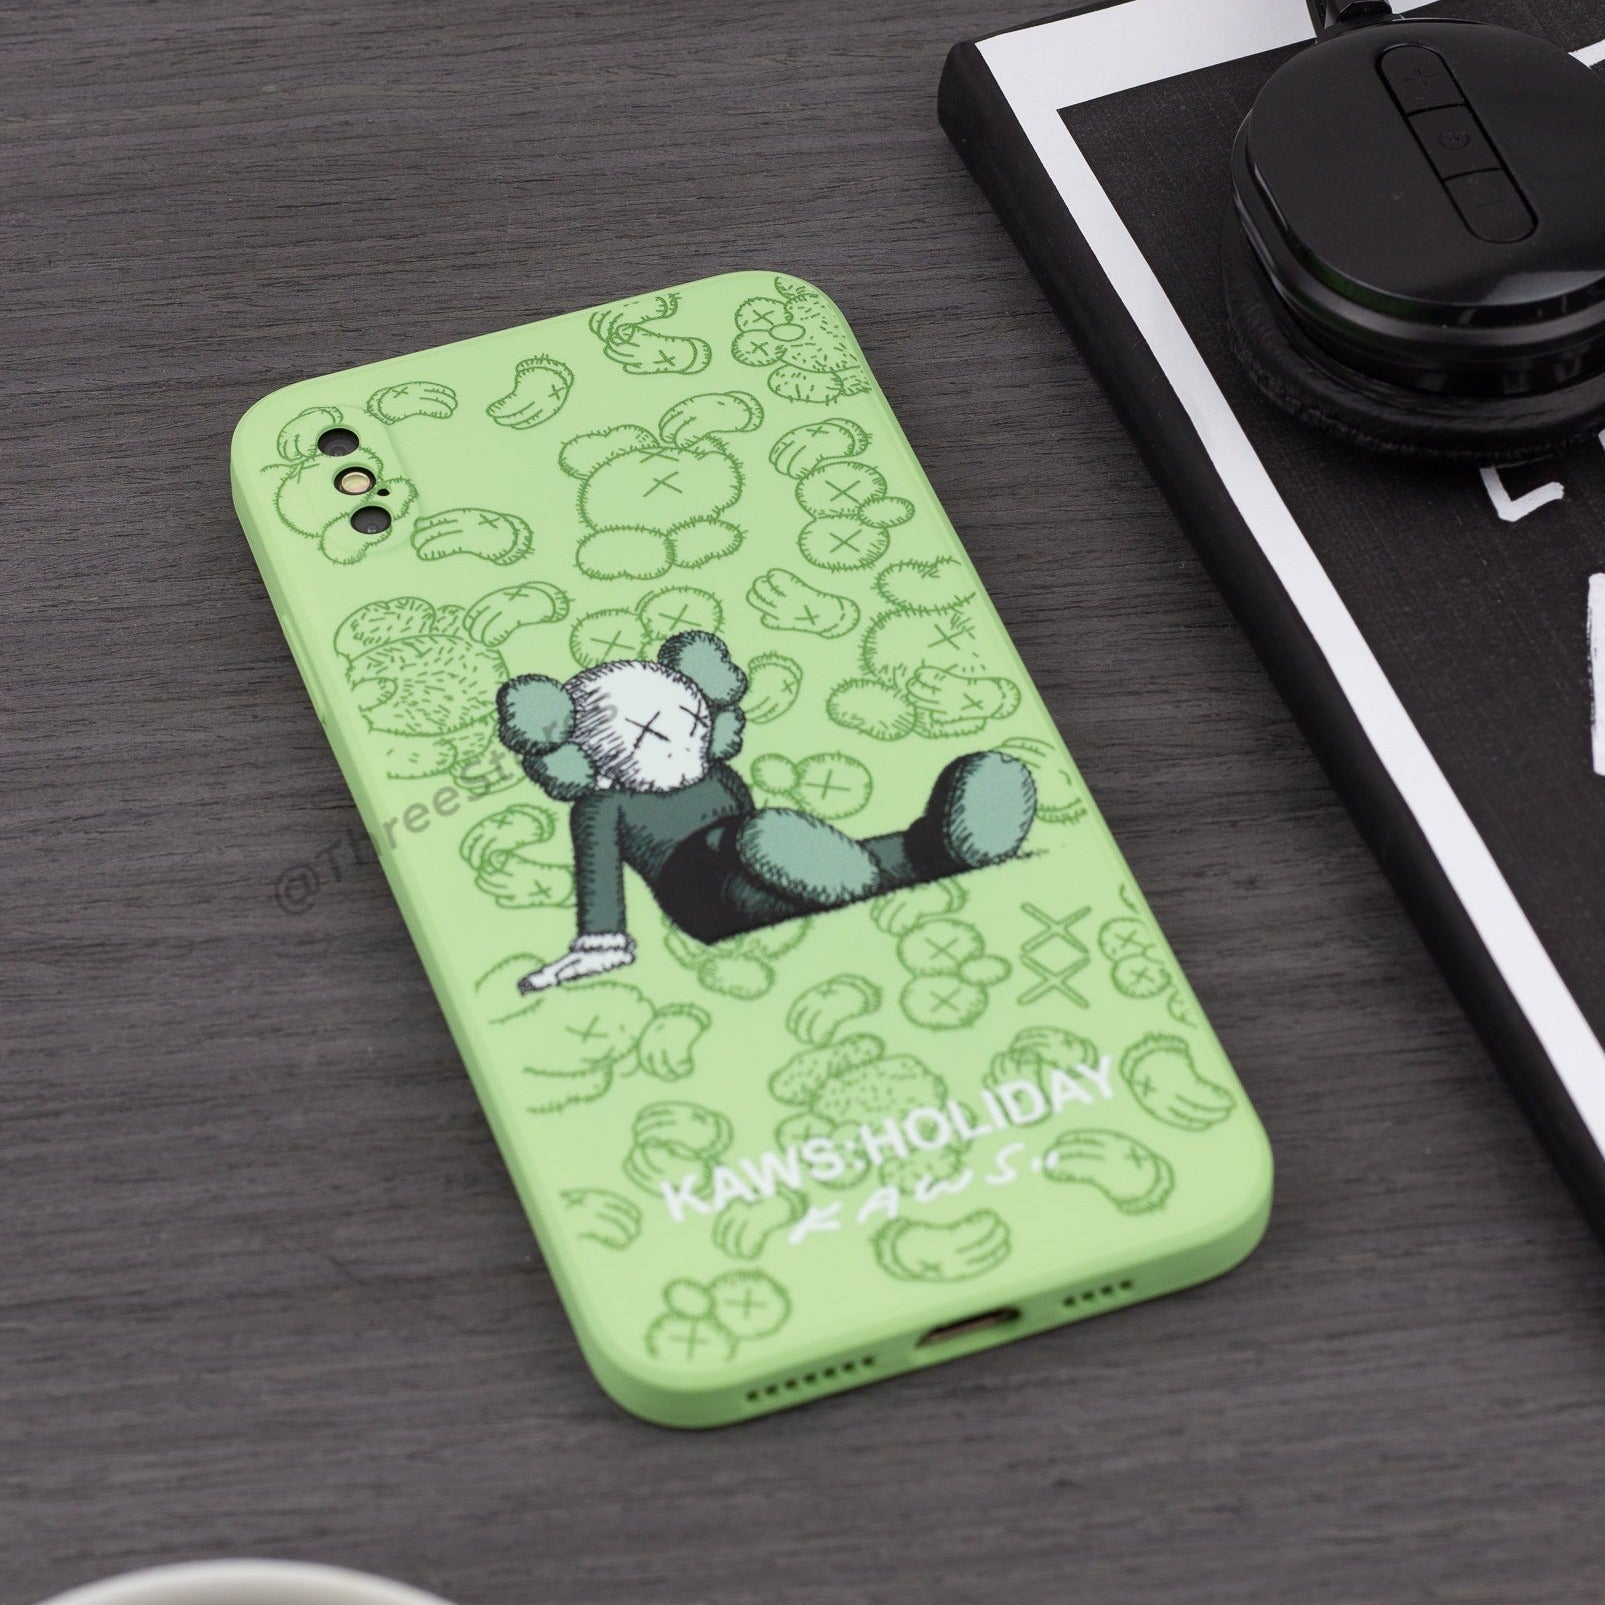 Boter Holiday Case iPhone X Max